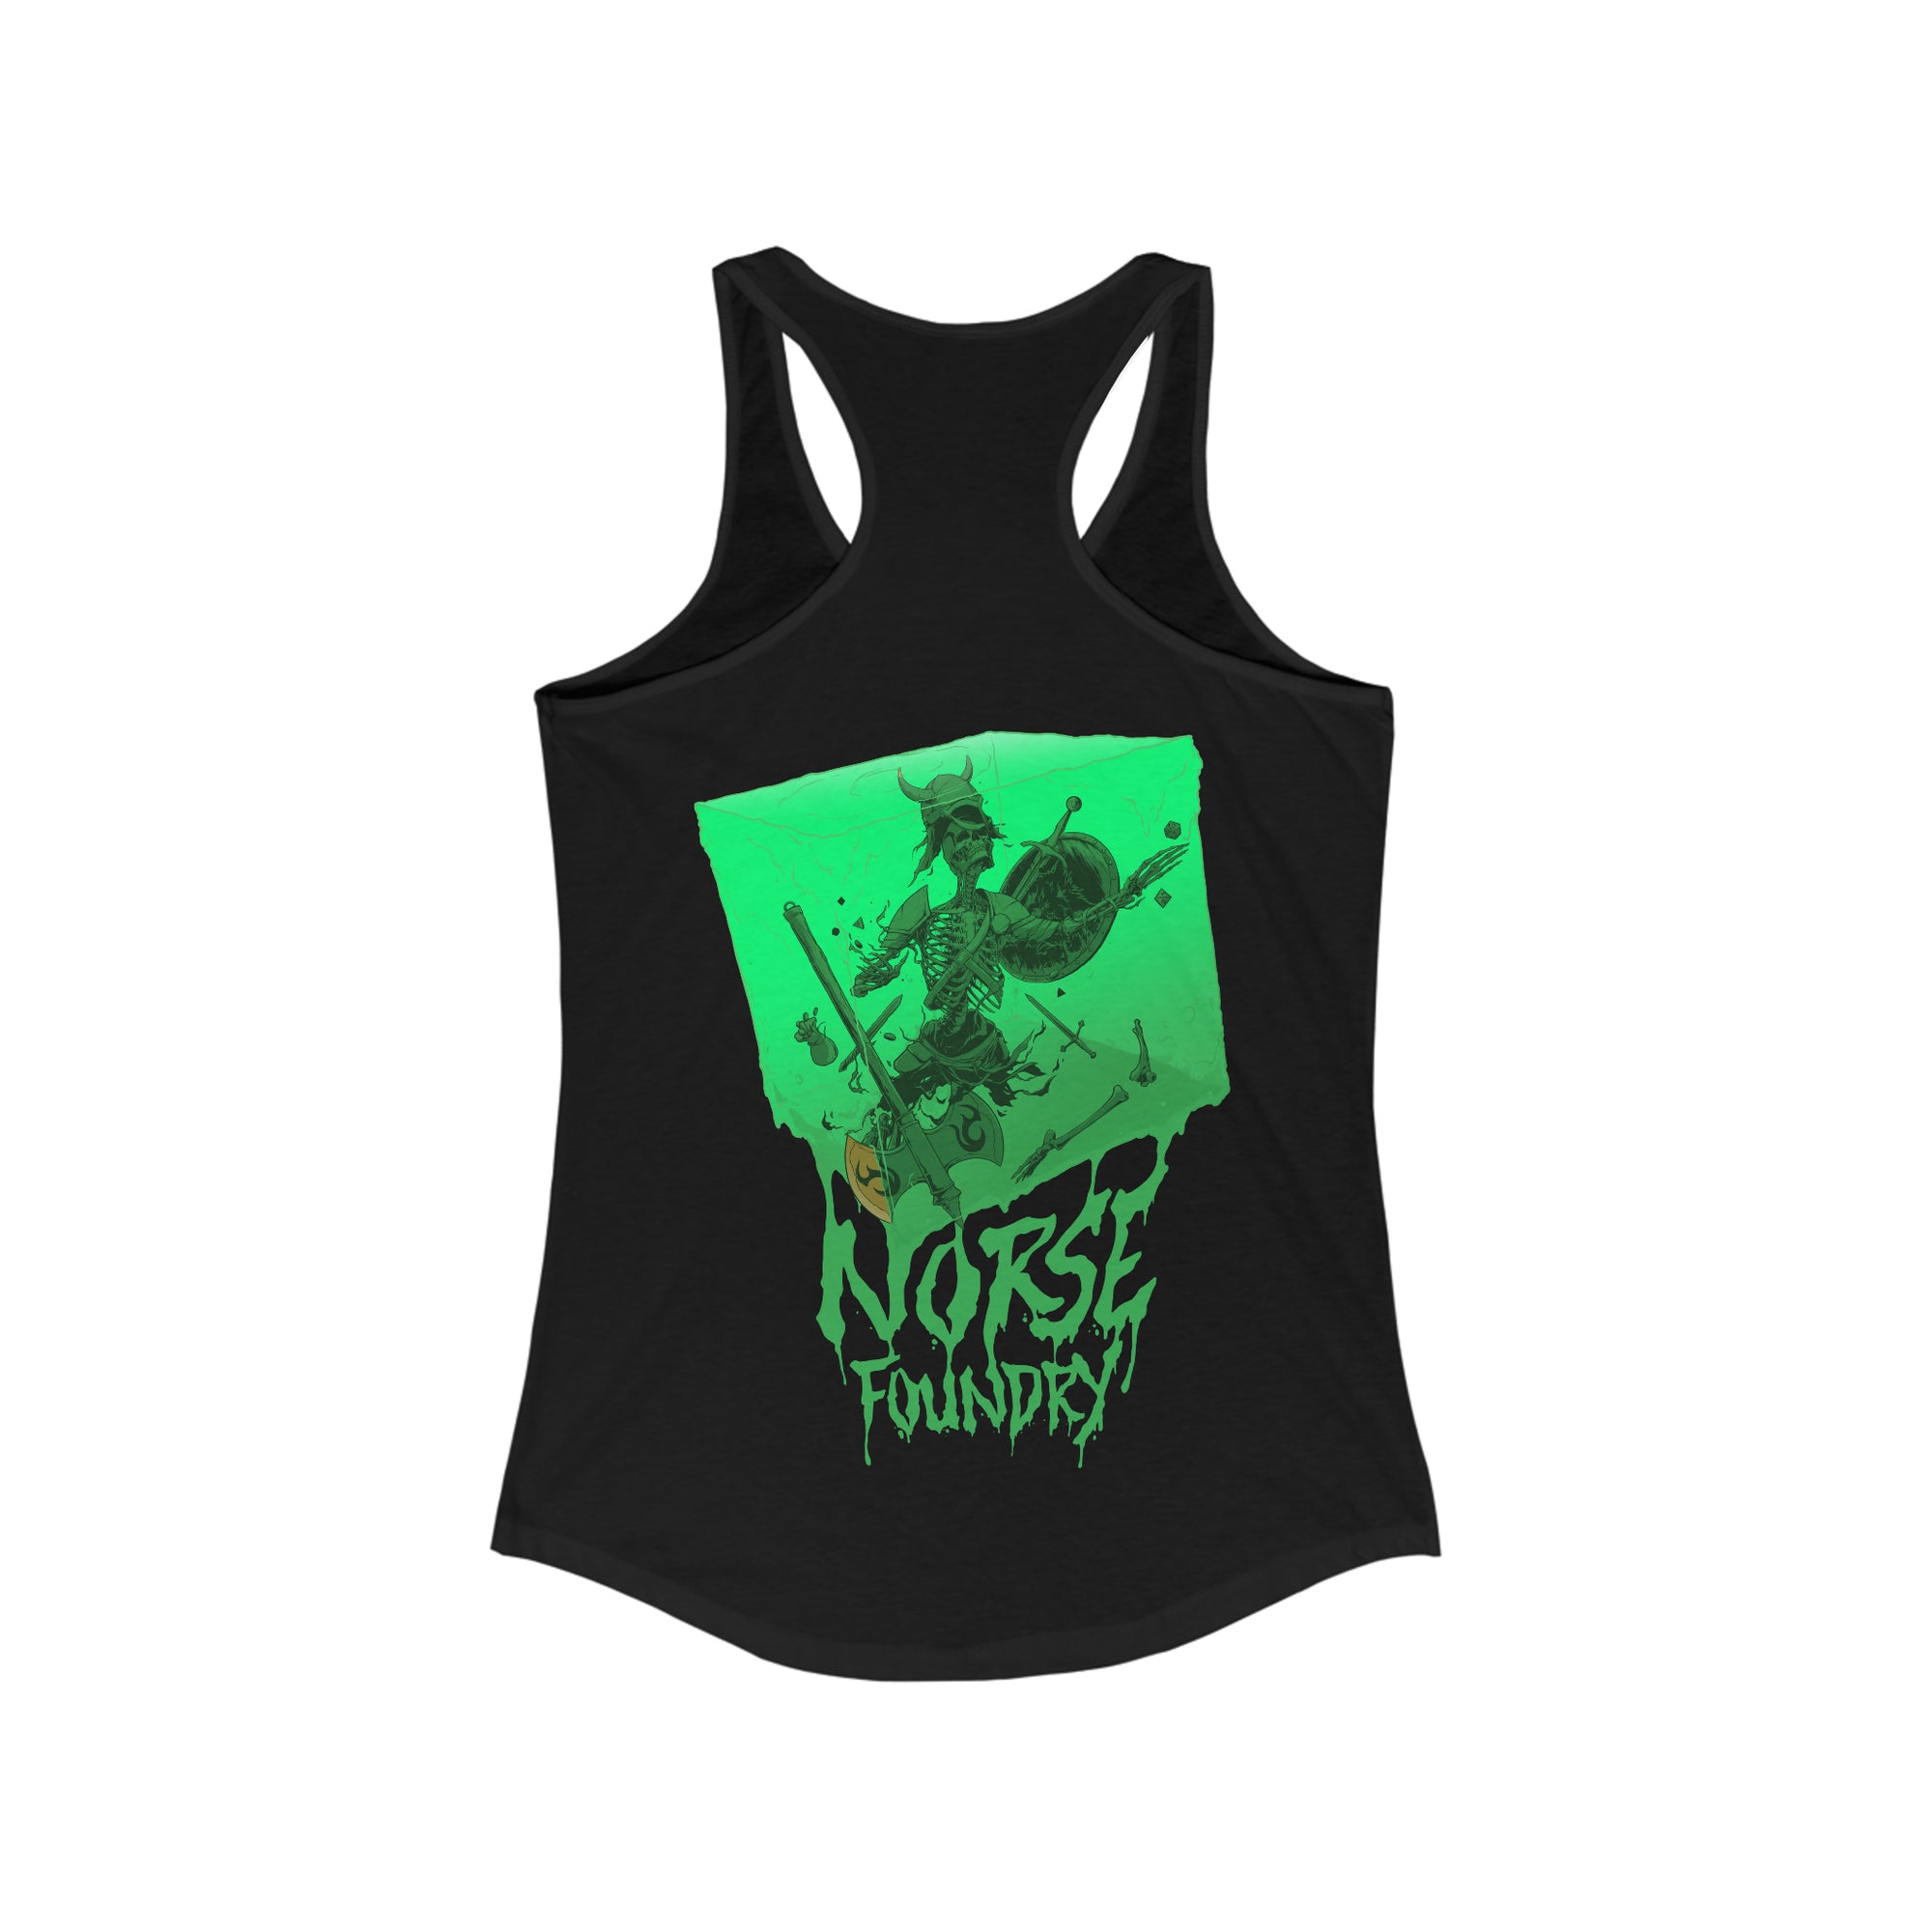 Cube - Norse Foundry Women's Tank Top